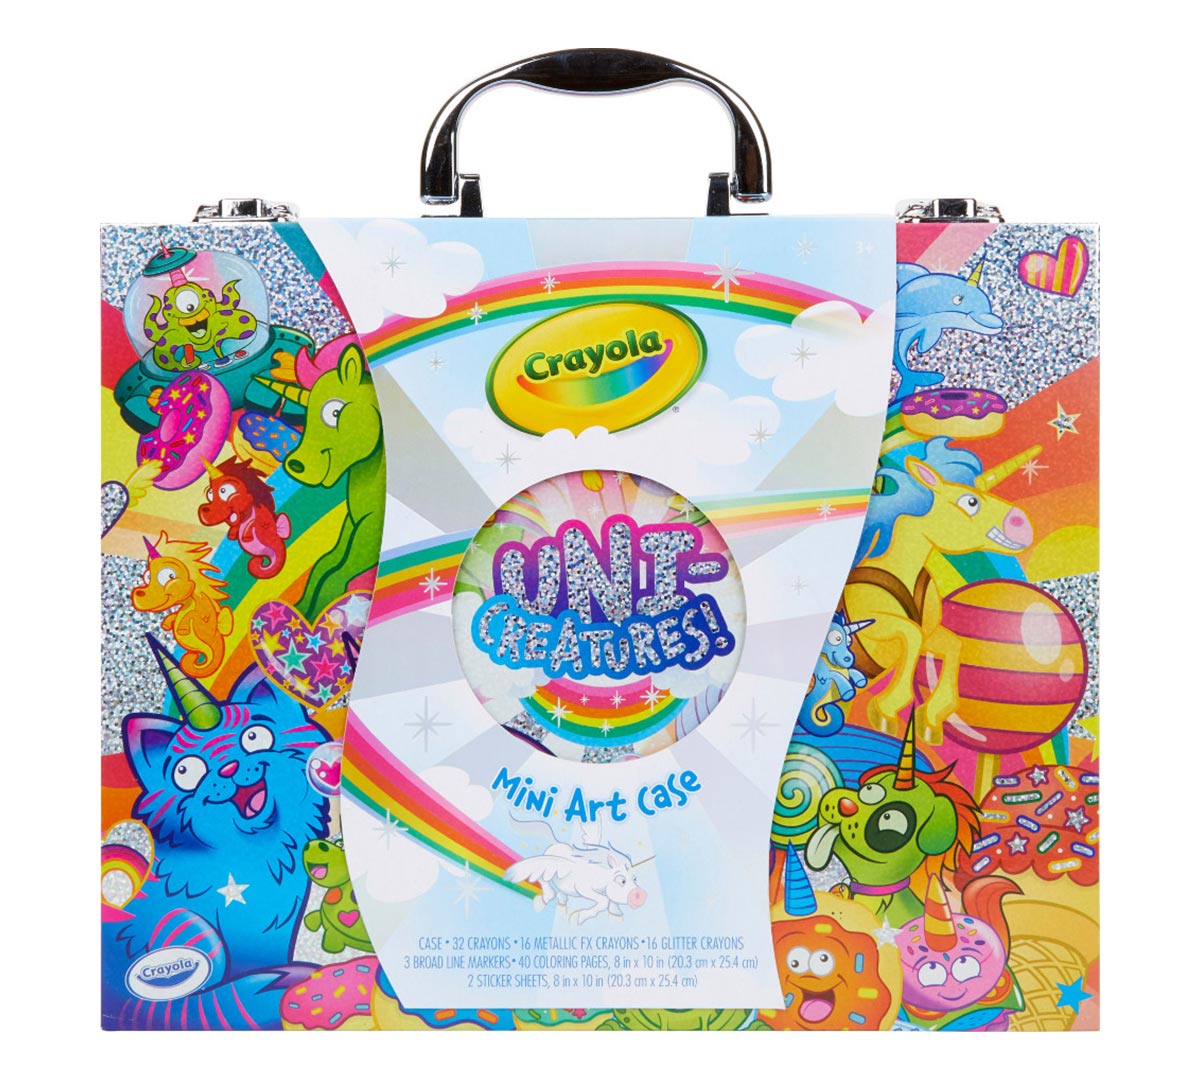 Download Crayola Uni-Creatures Art Case, Unicorn Coloring Pages, Over 100 Pieces, Gift, Ages 4, 5, 6, 7 ...